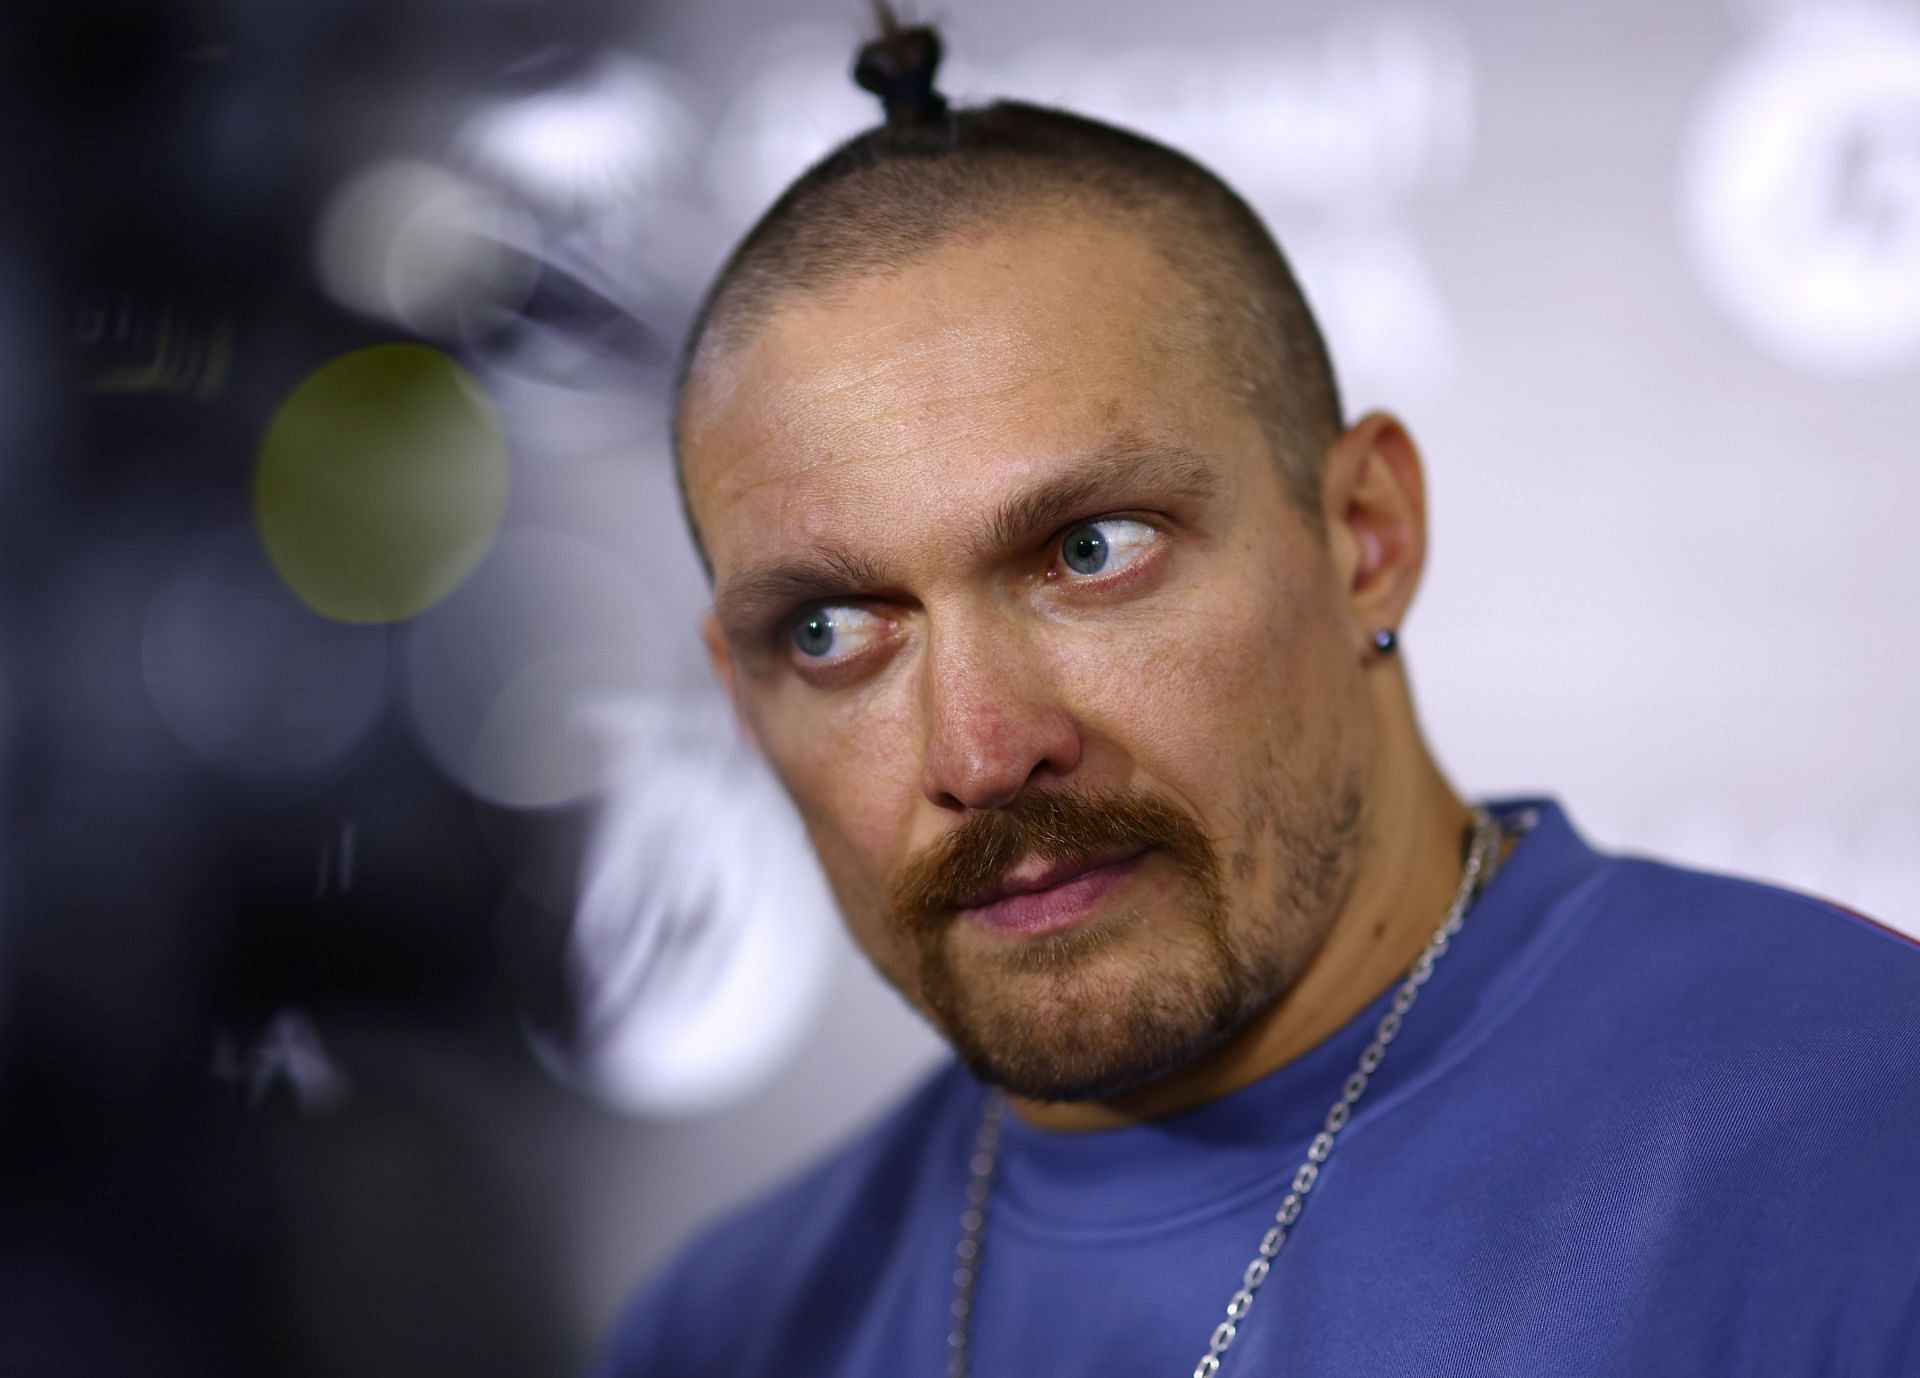 Oleksandr Usyk at a recent media event